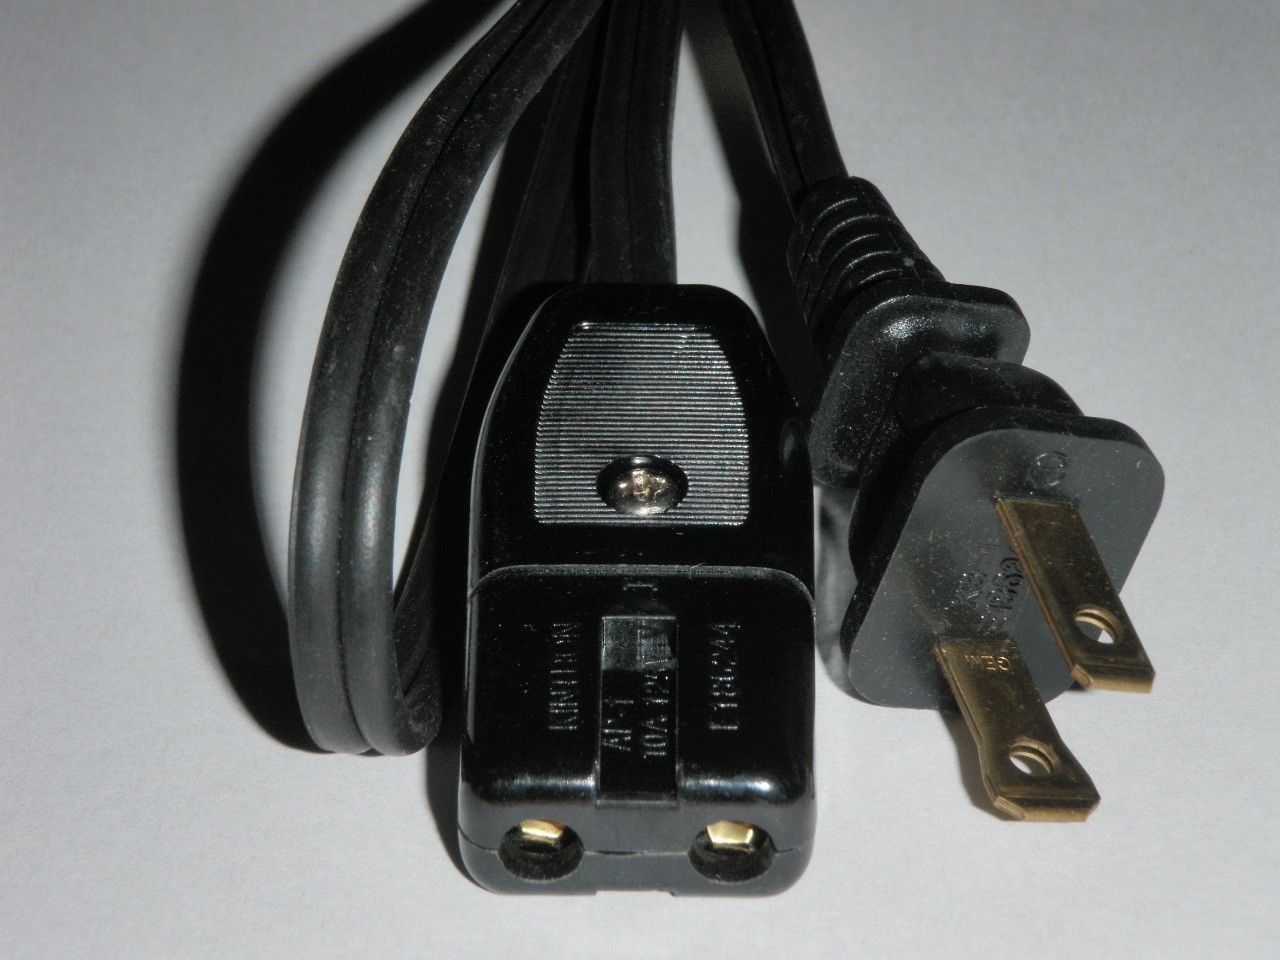 Power Cord for Toastmaster Coffee Percolator Models M501 M502 M506 (2pin 36") - $14.49